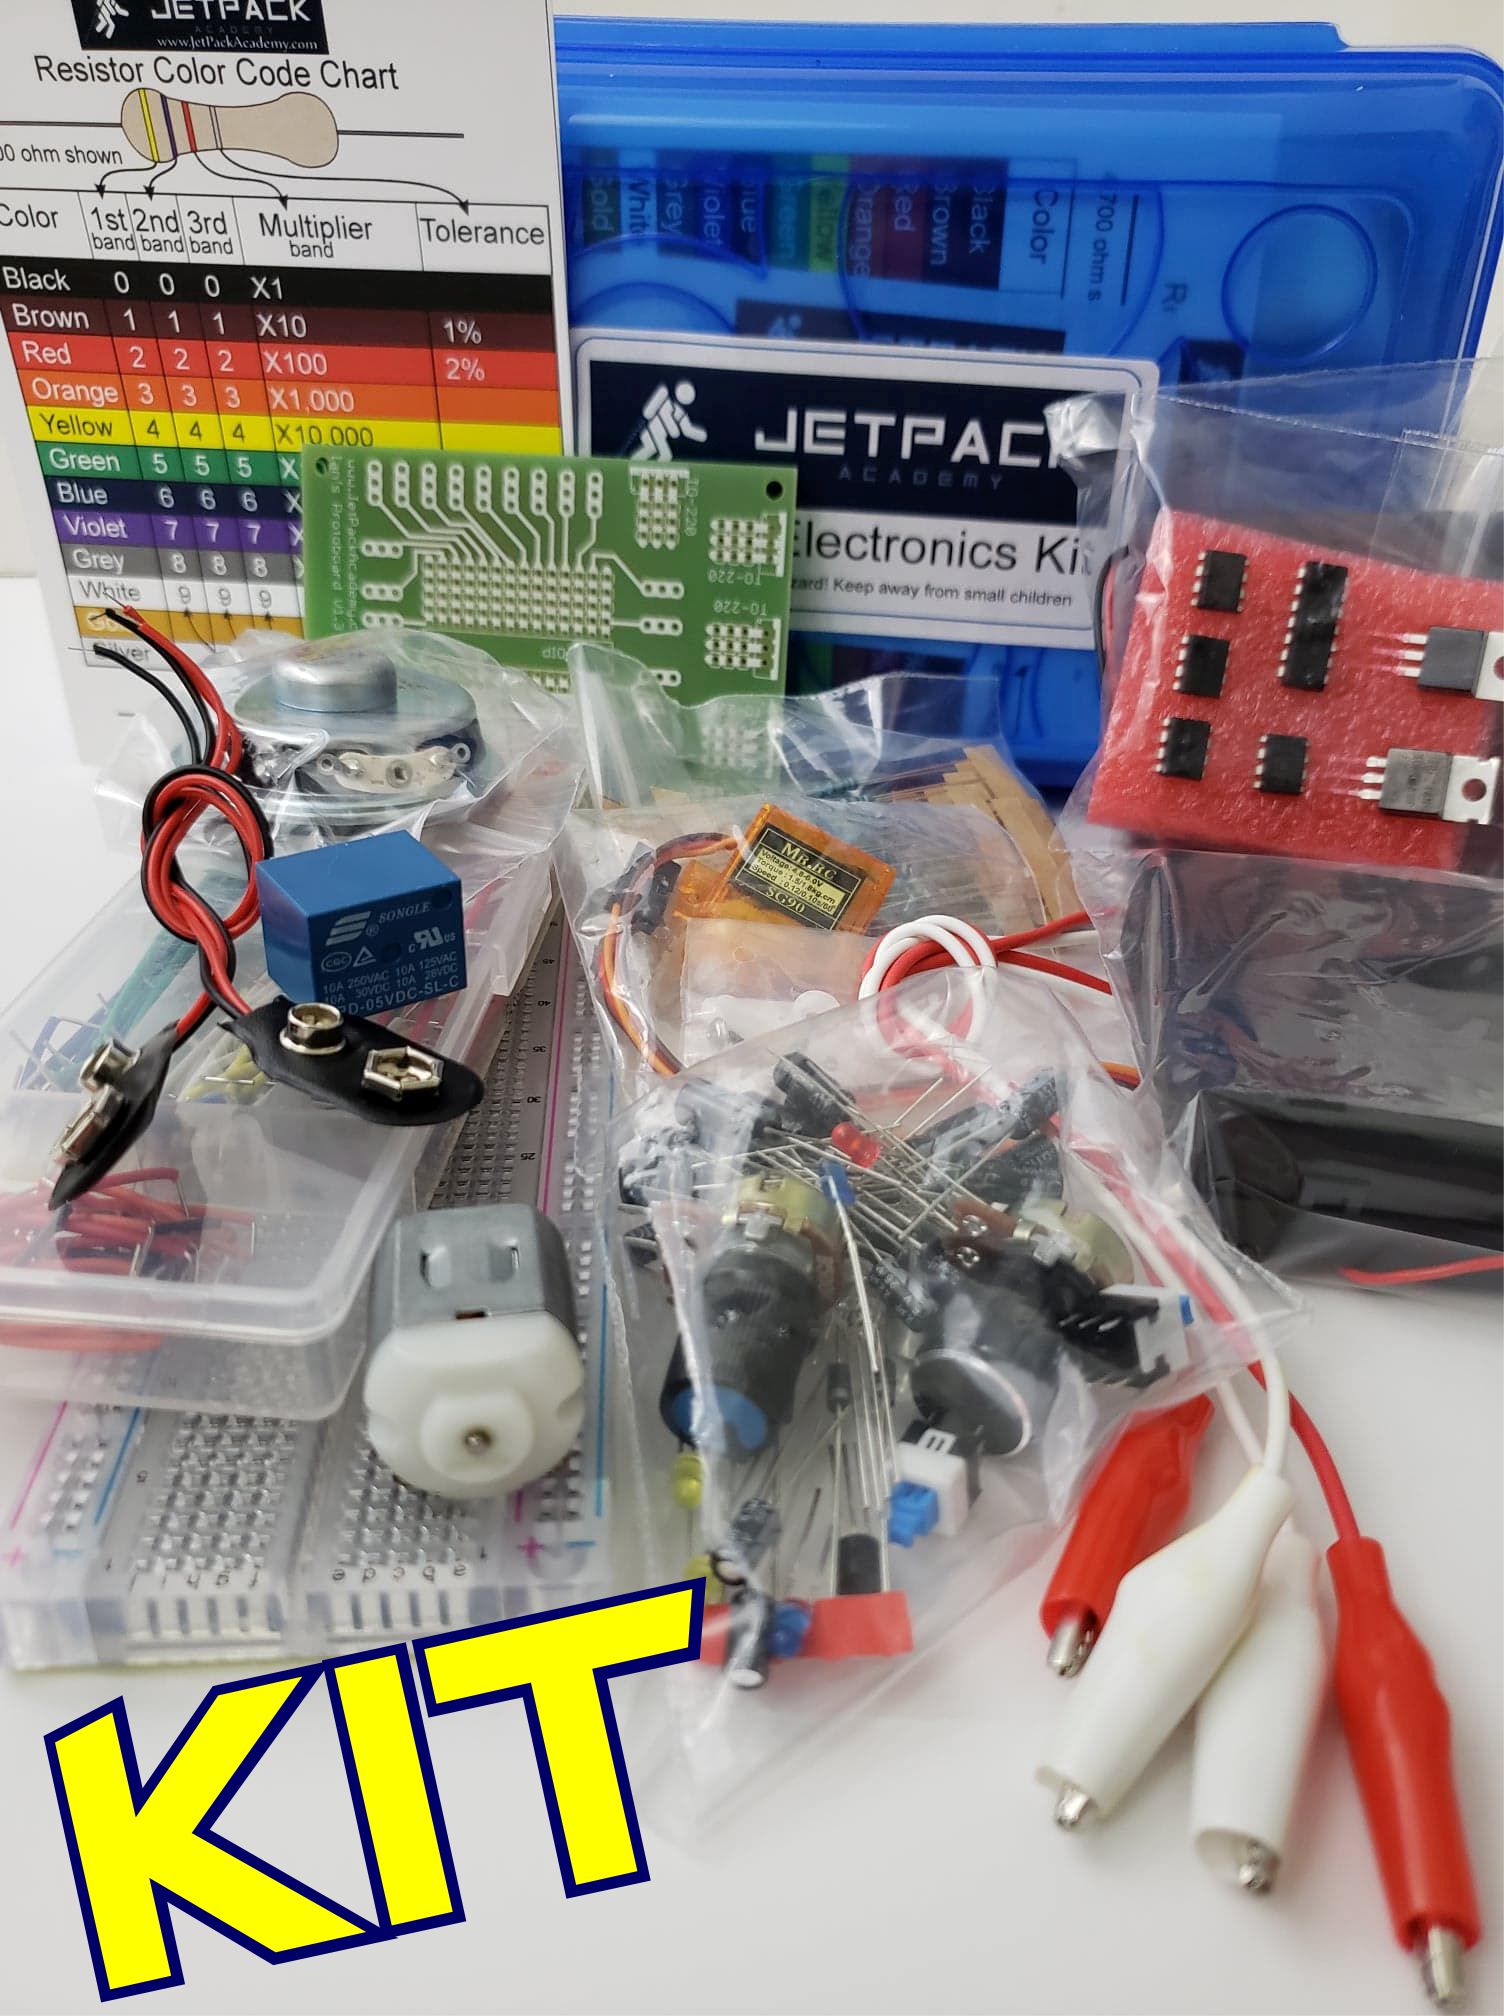 Bundle package: Robotics: Learn by building module 1: Electricity &  Electronics with the Analog electronics kit!